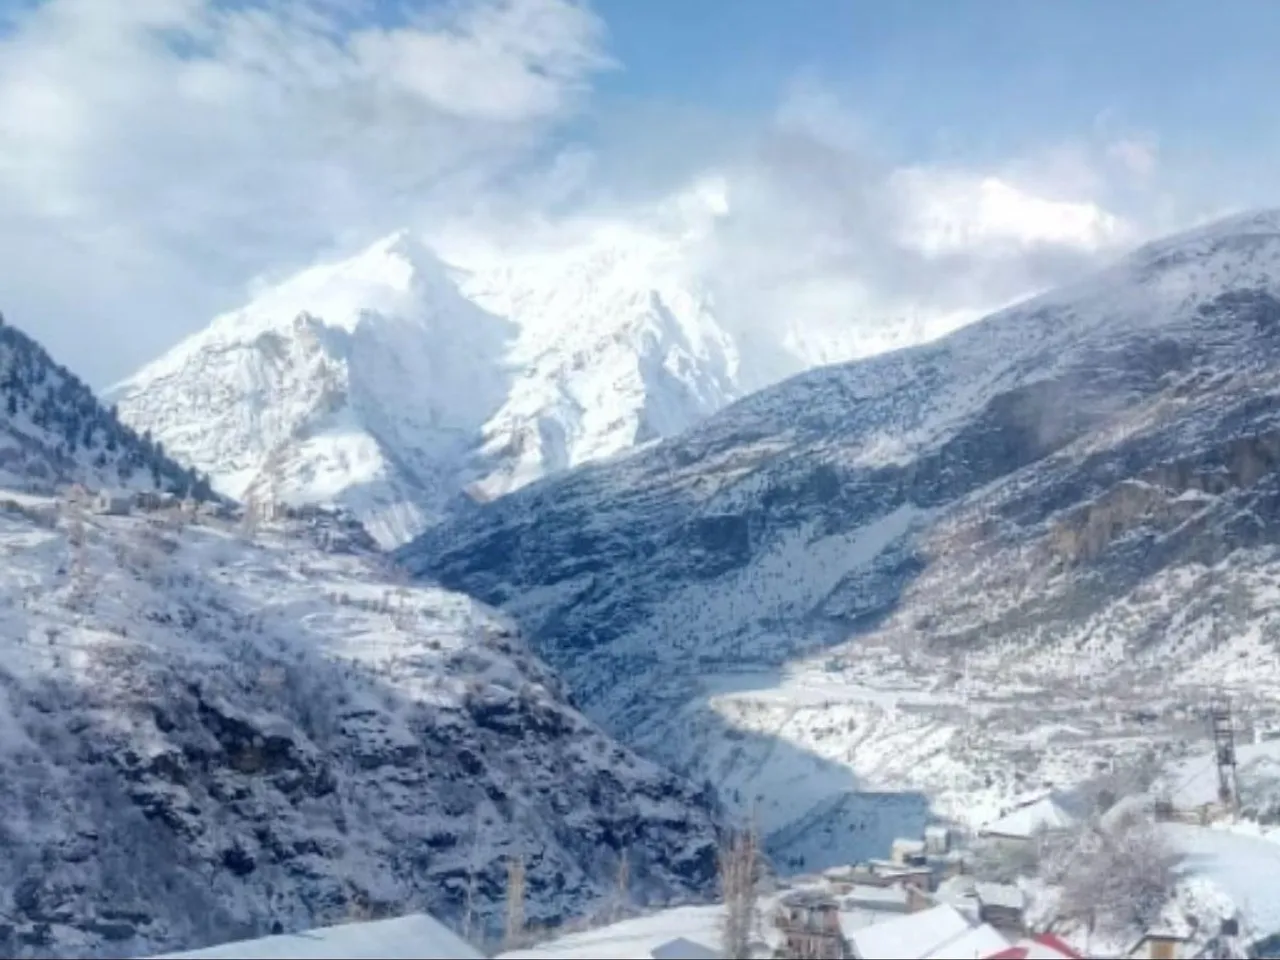 Over 250 people stuck in Lahaul Spiti after snowfall rescued, many still stranded